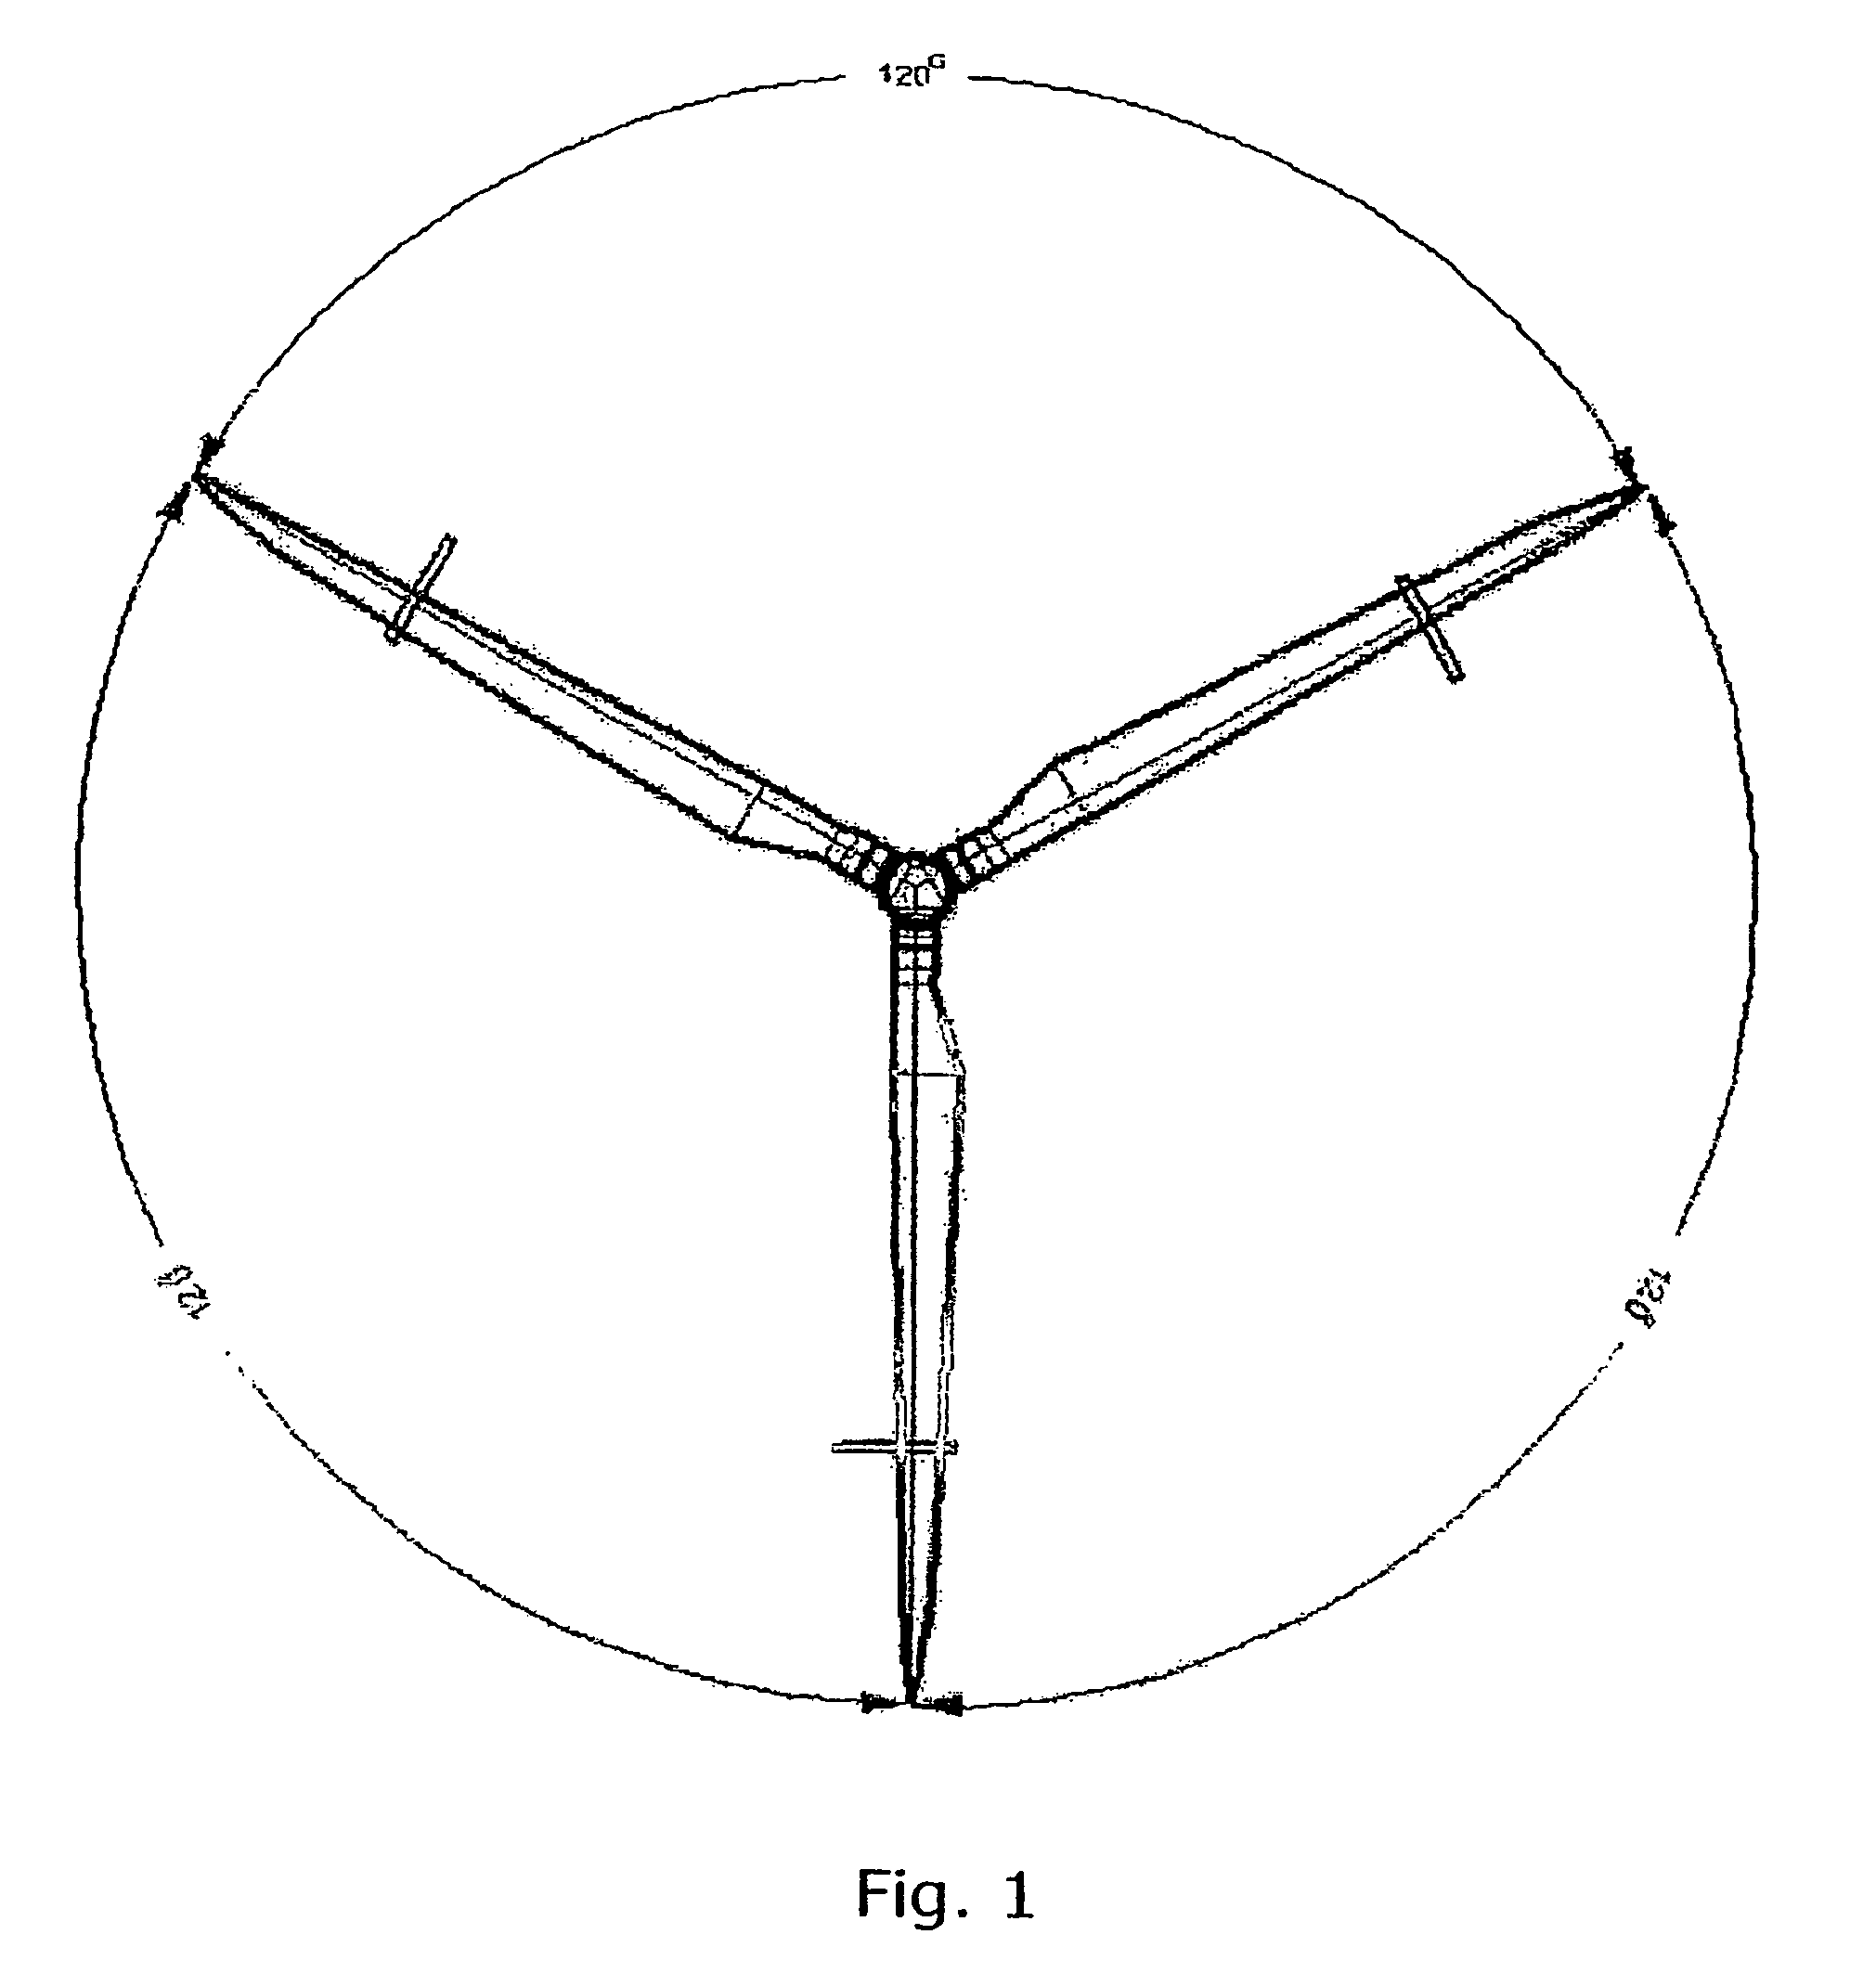 Method of controlling aerodynamic load of a wind turbine based on local blade flow measurement